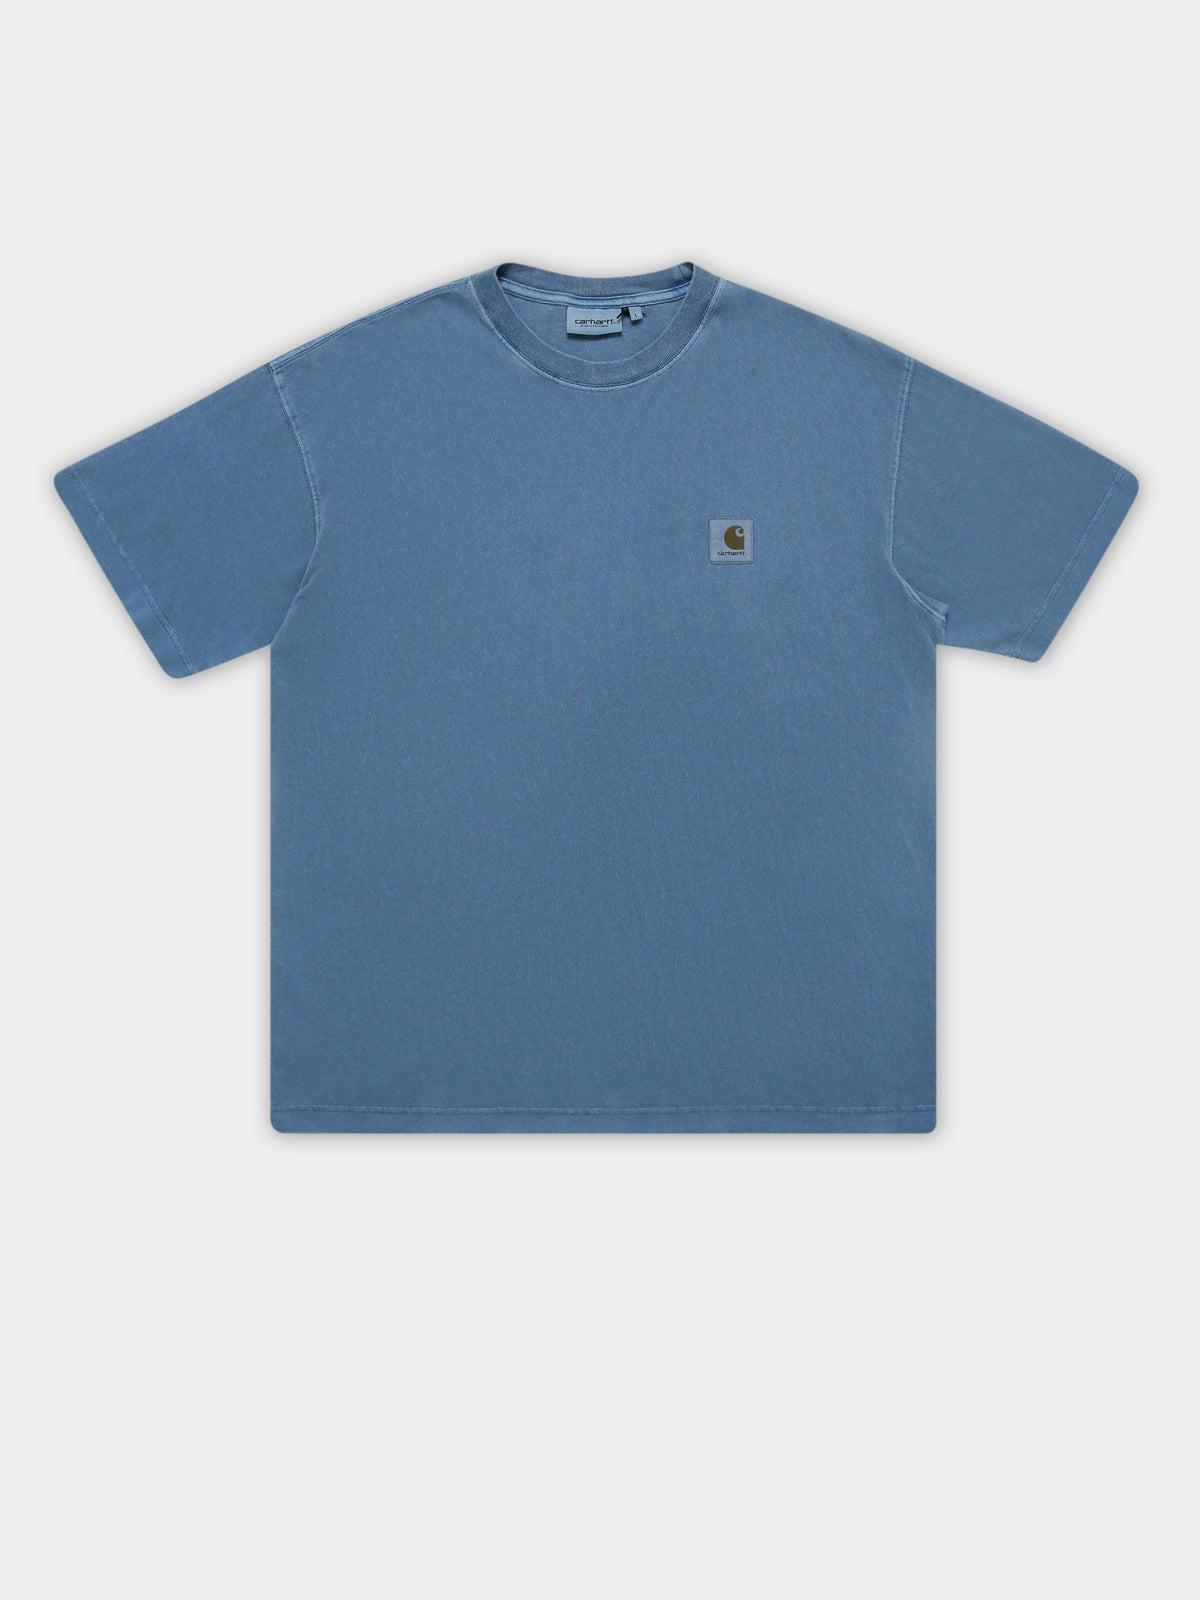 Nelson T-Shirt in Blue